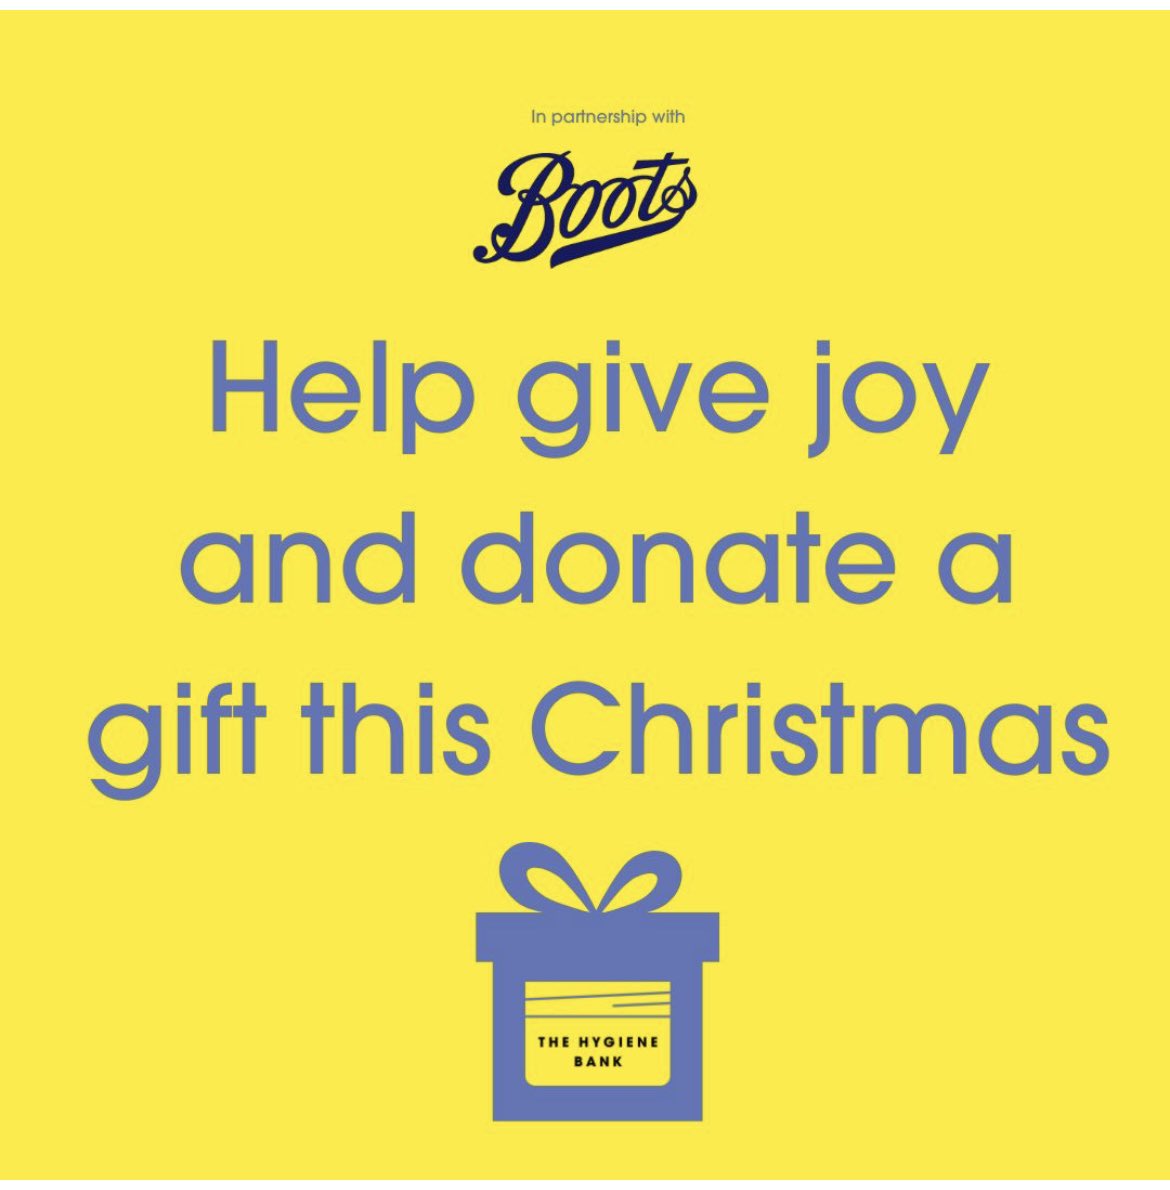 Over 120,000 reasons to be joyful!
We are proud to be Boots UK official
Christmas charity partner 2023!
As part of their festive commitment, our longstanding partner Boots will donate an additional 100,000 essential hygiene products to help us support communities this winter.